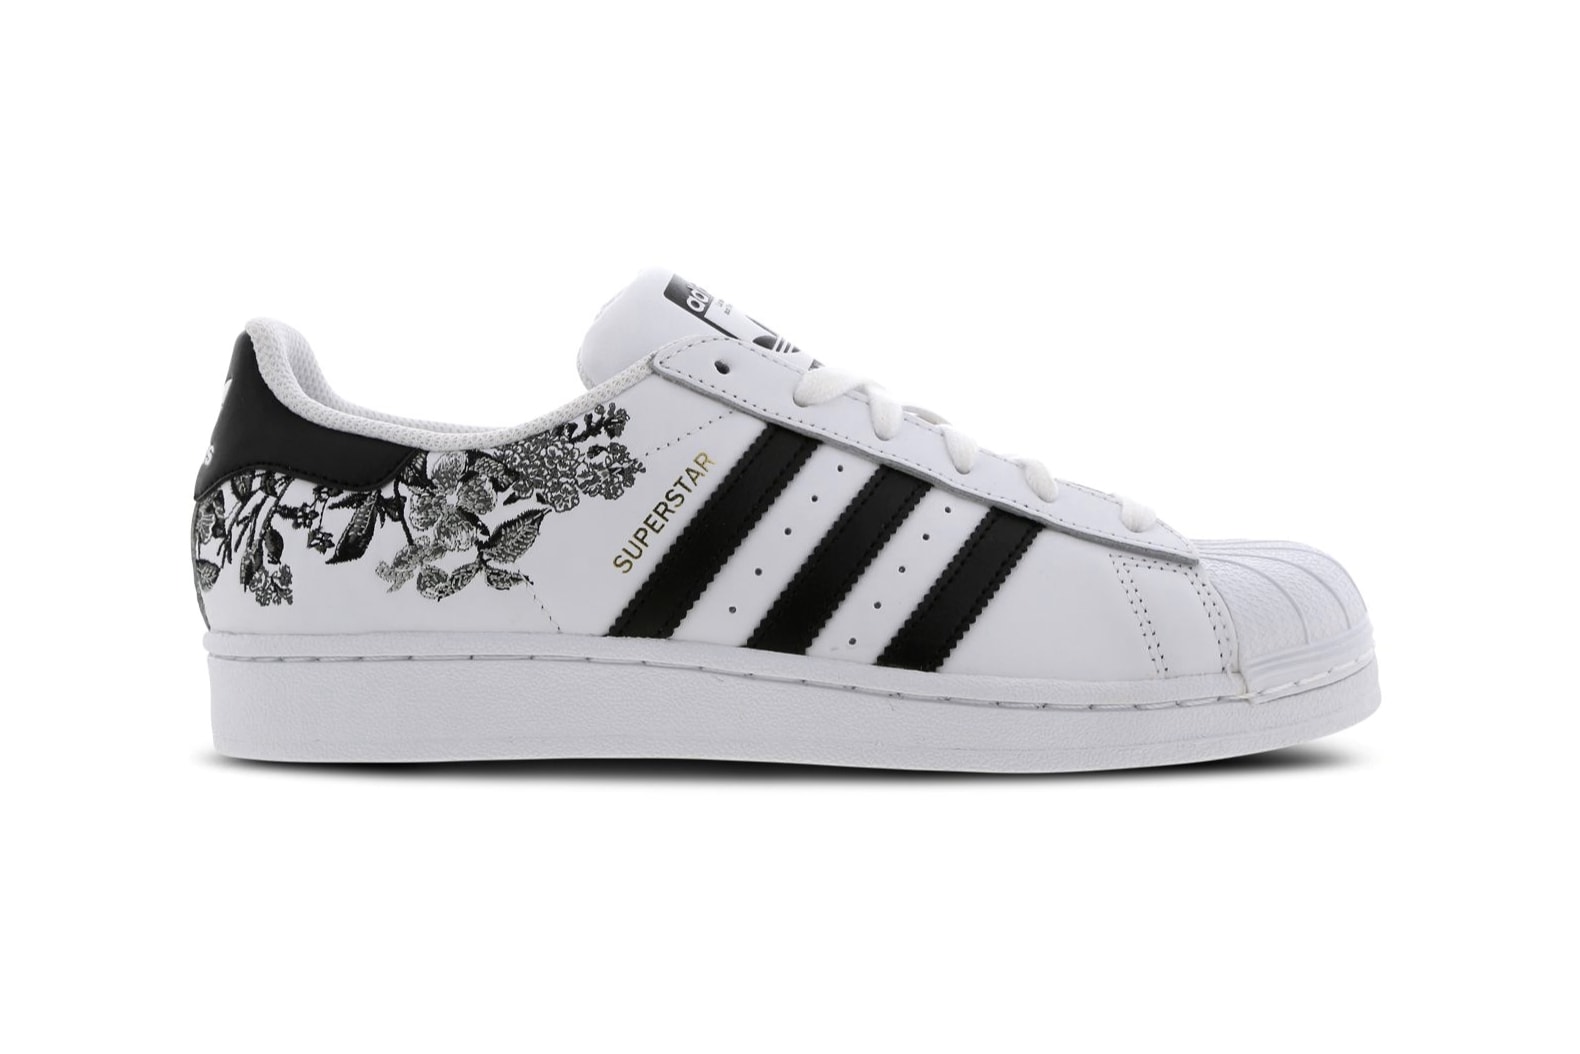 adidas Originals Floral Black and White Superstar 80s Sneakers